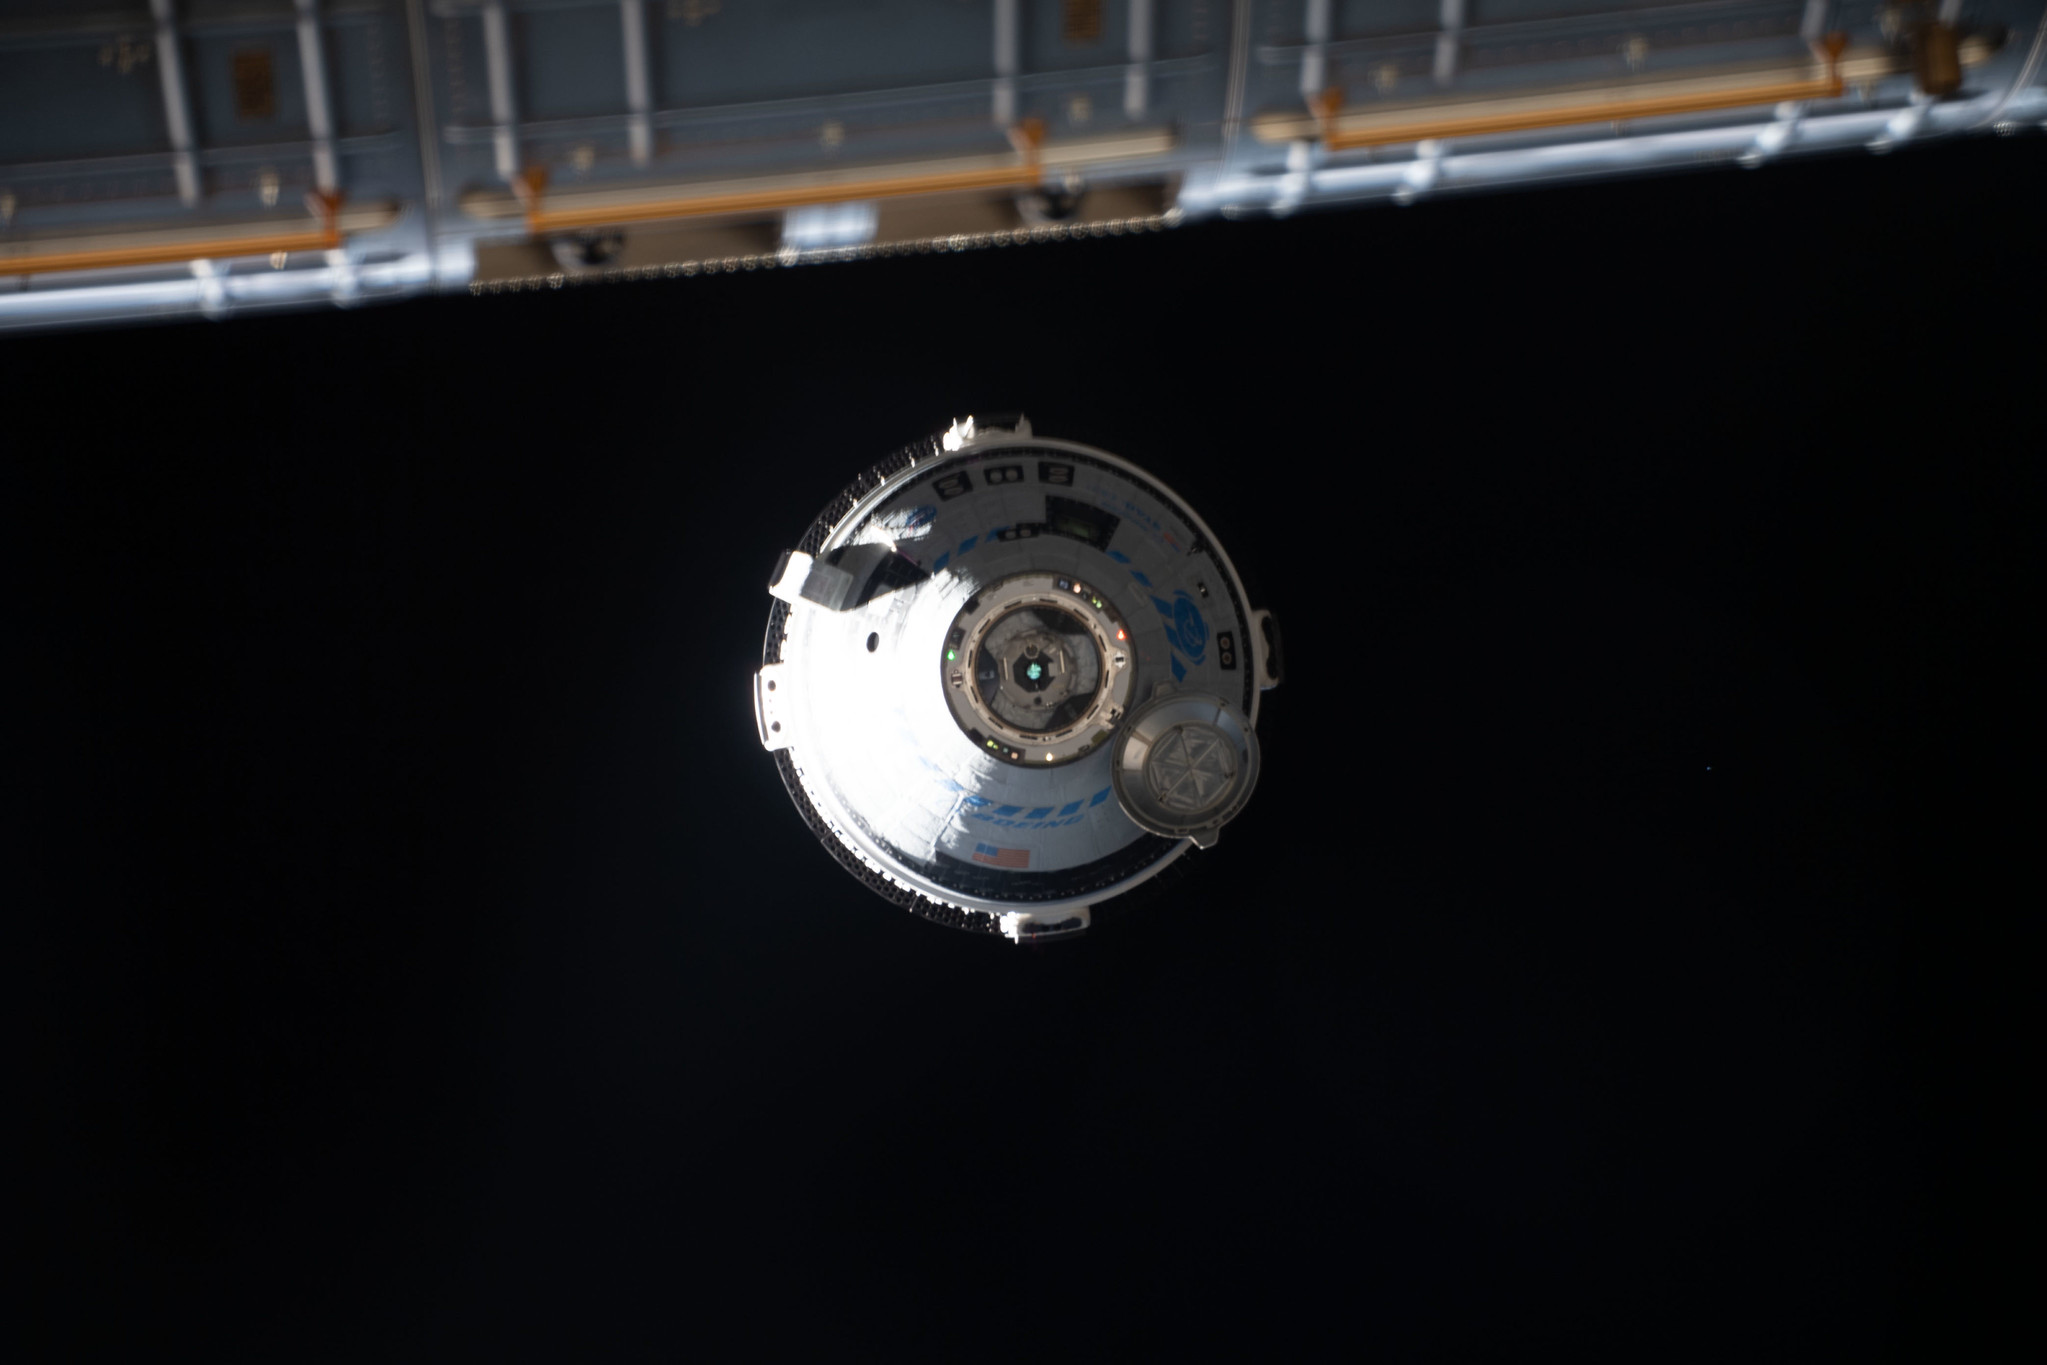 NASA Sets Coverage for Boeing Starliner’s First Crewed Launch, Docking